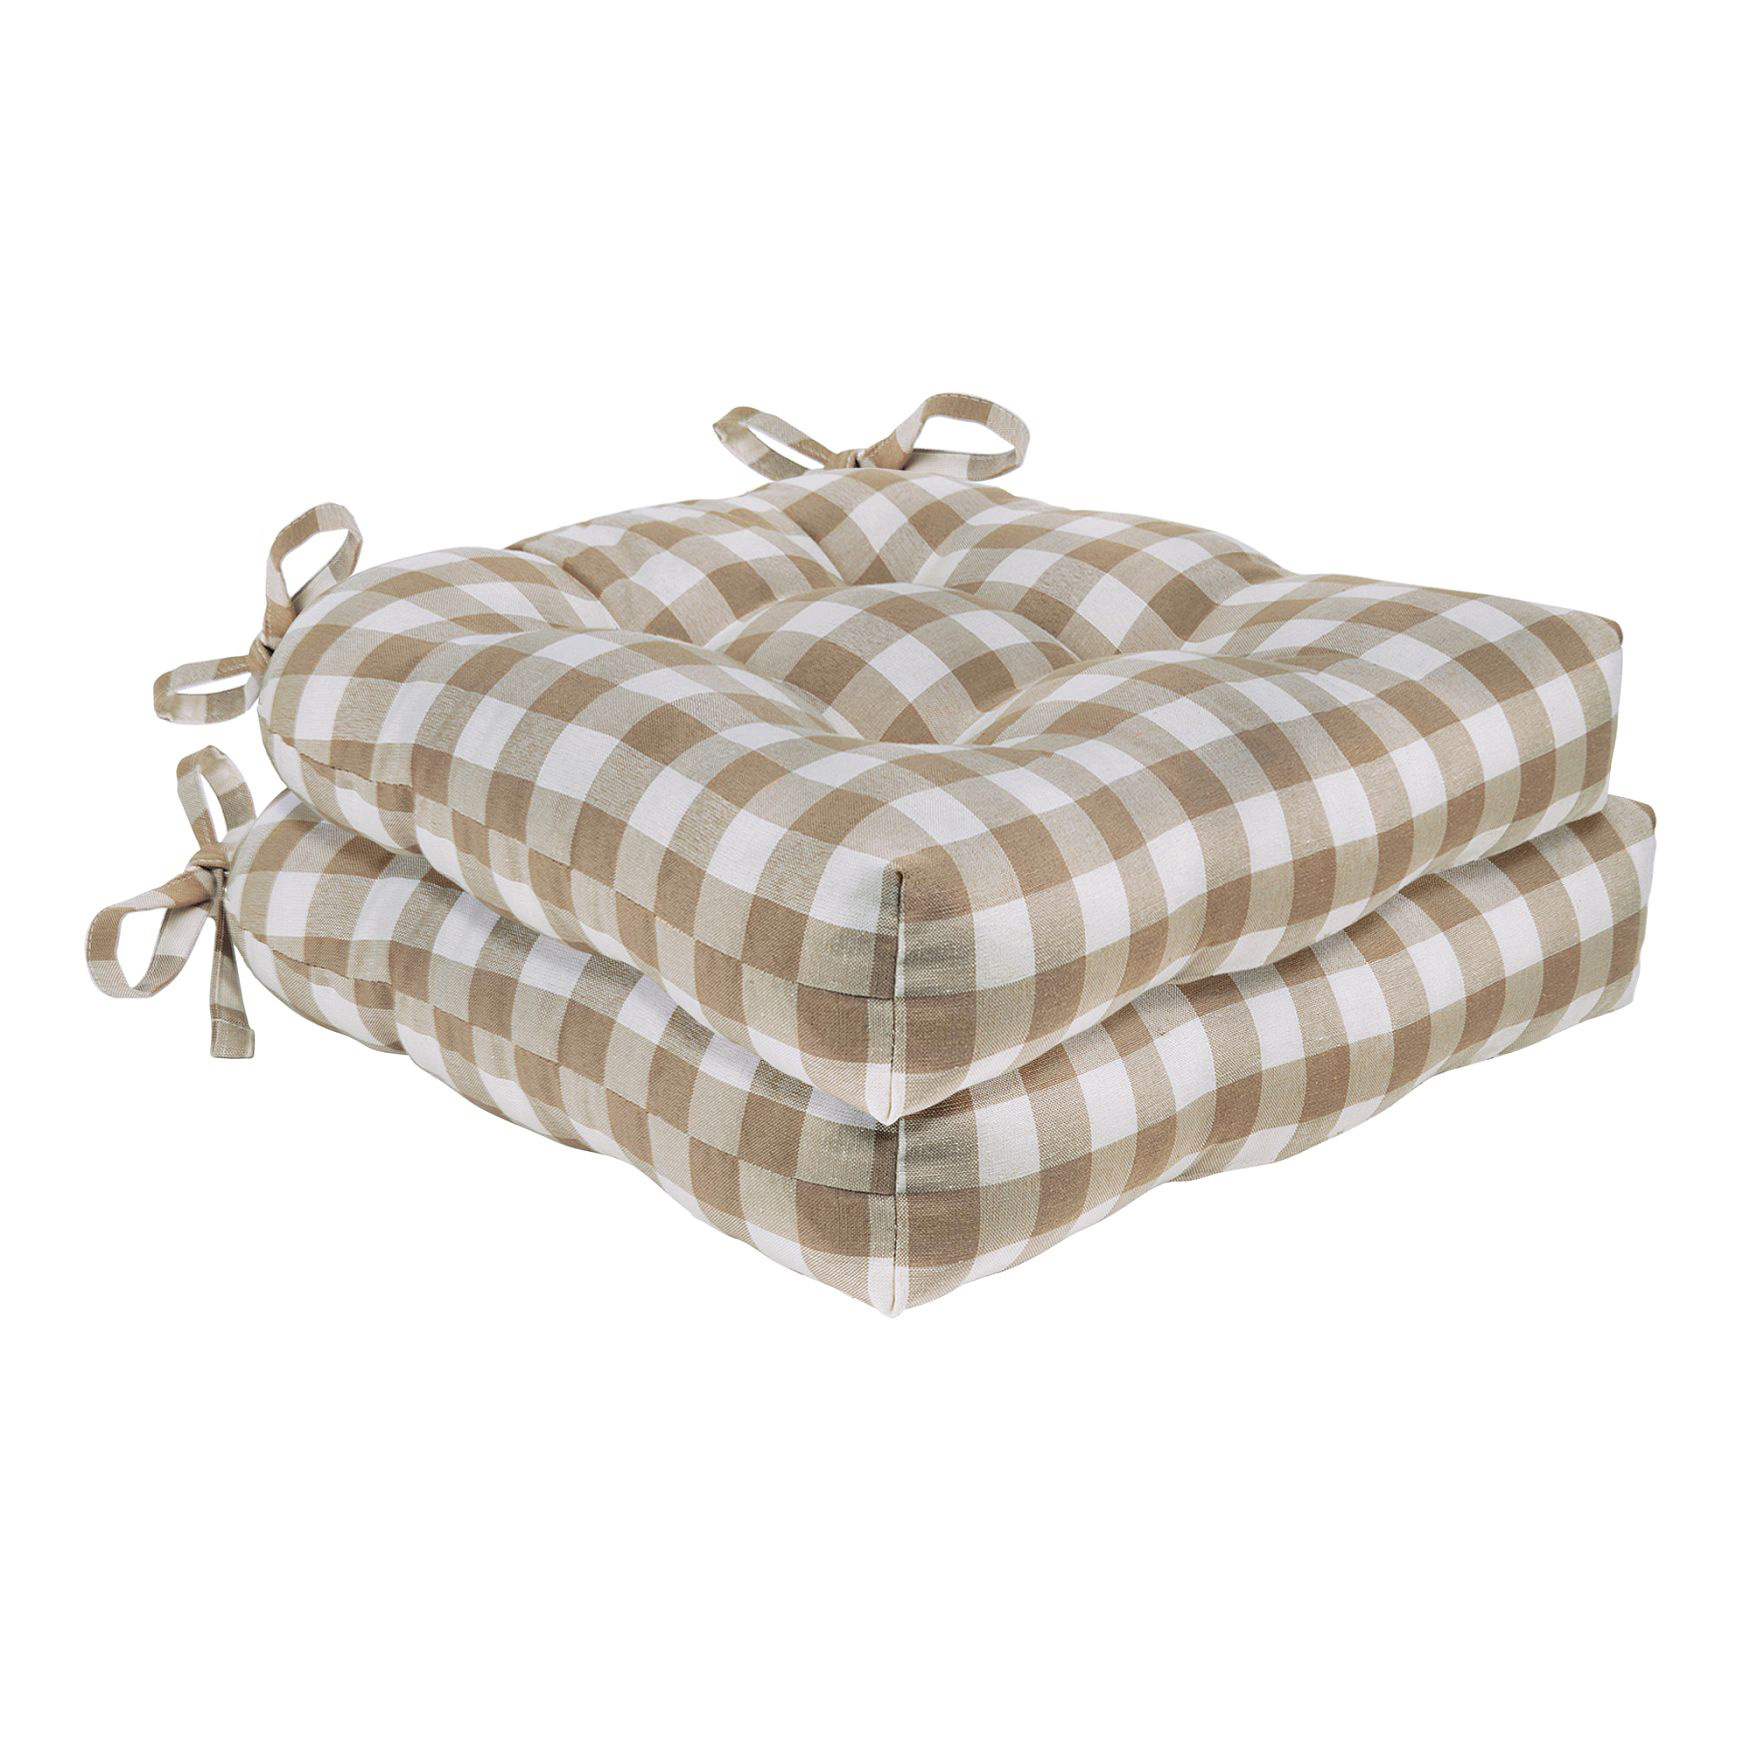 Buffalo Check Tufted Chair Seat Cushions Set of Two, 